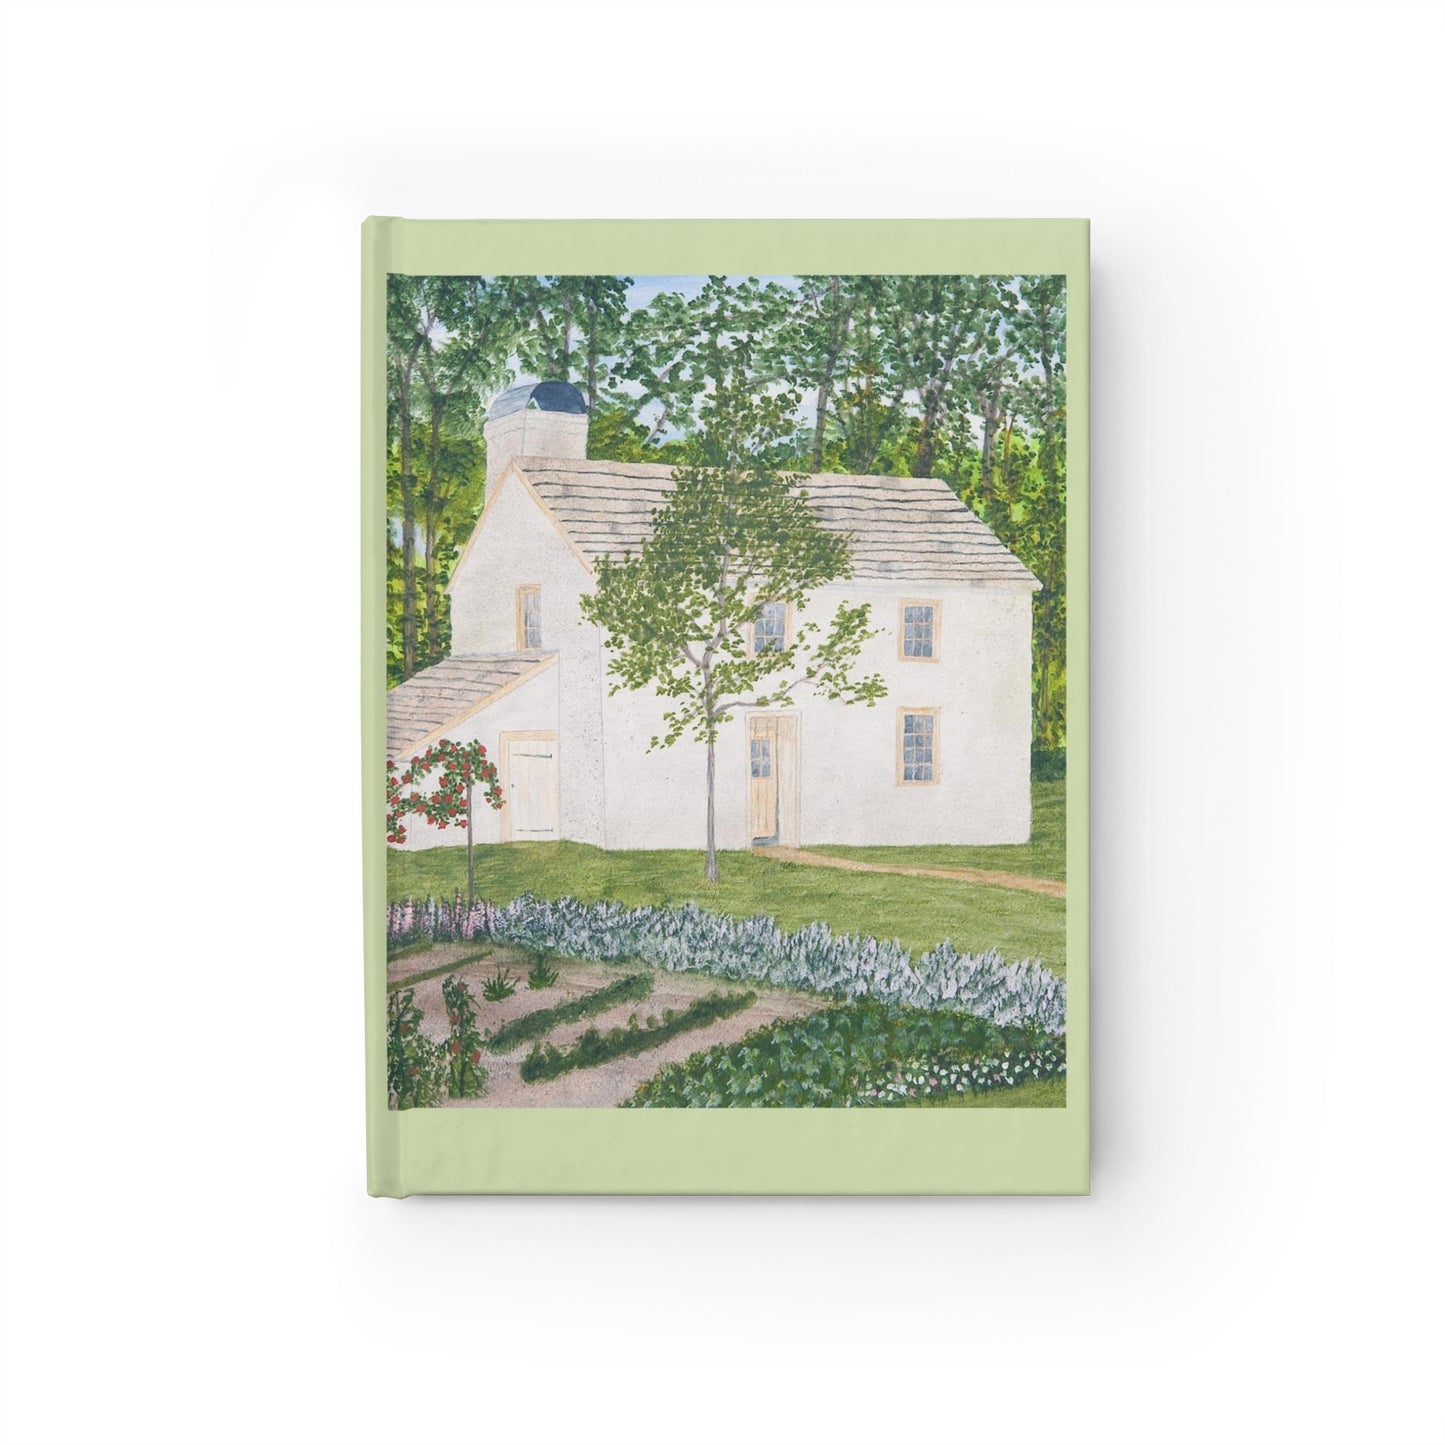 The attractive Country Garden Lined Page Journal is perfect for your personal journal, or for keeping notes on any favorite  subject.  The journal features a reproduction of a watercolor painting by artist Lee M. Buchanan.